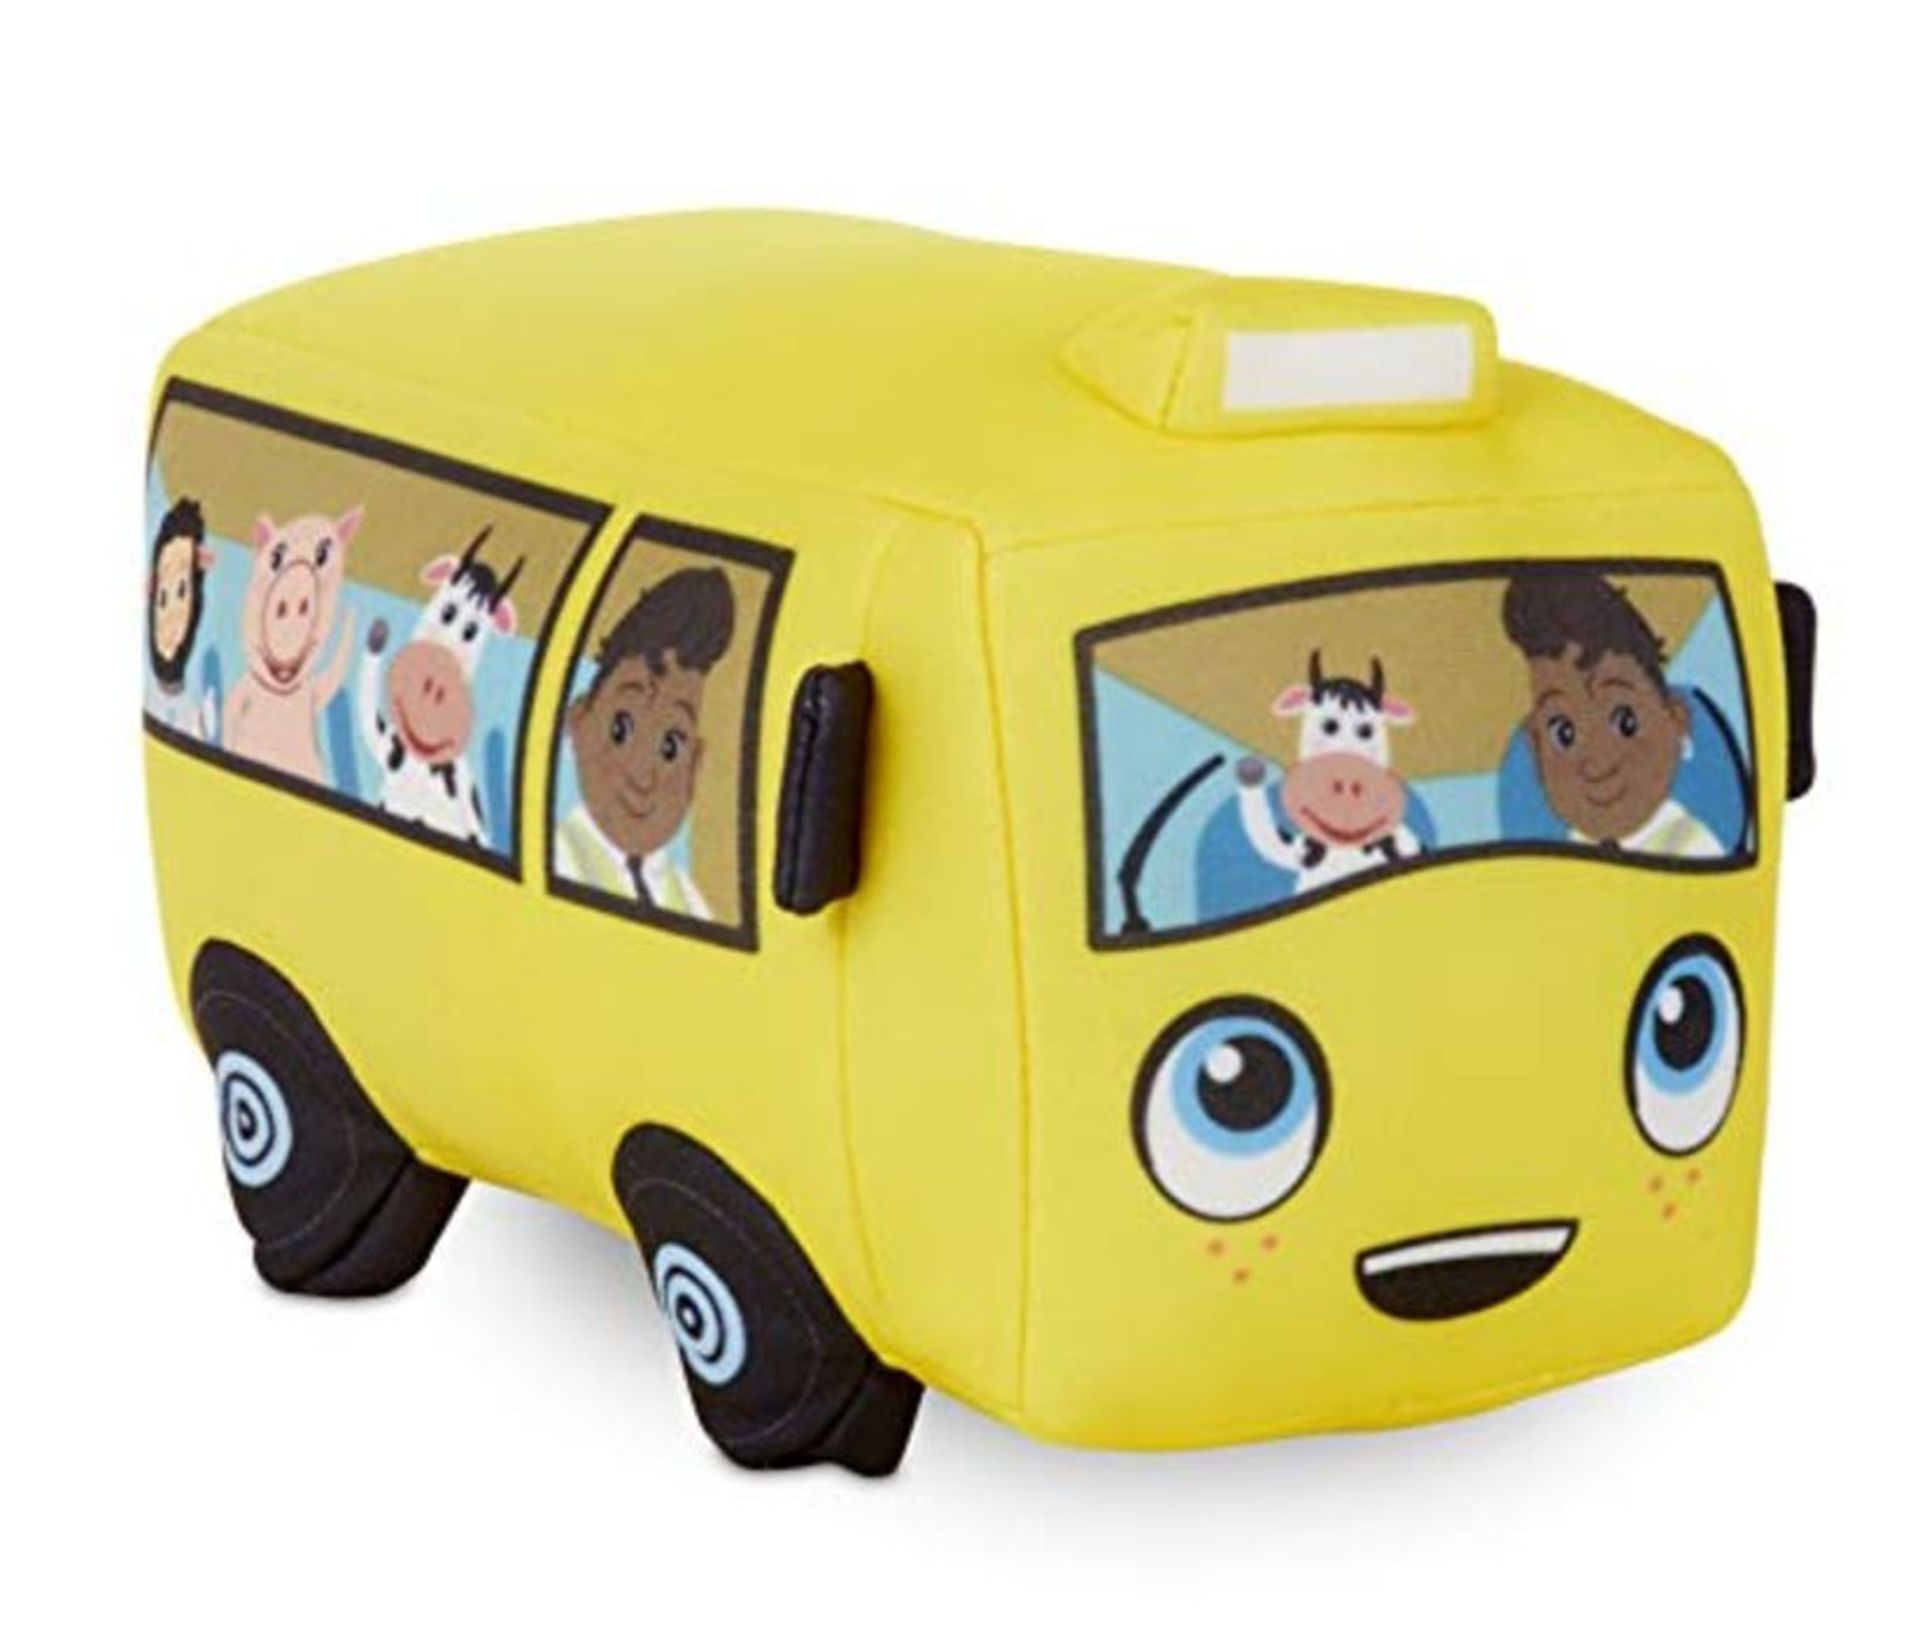 Little Baby Bum Little Tikes Wiggling Wheels on the Bus - Play & Learn - Interactive -